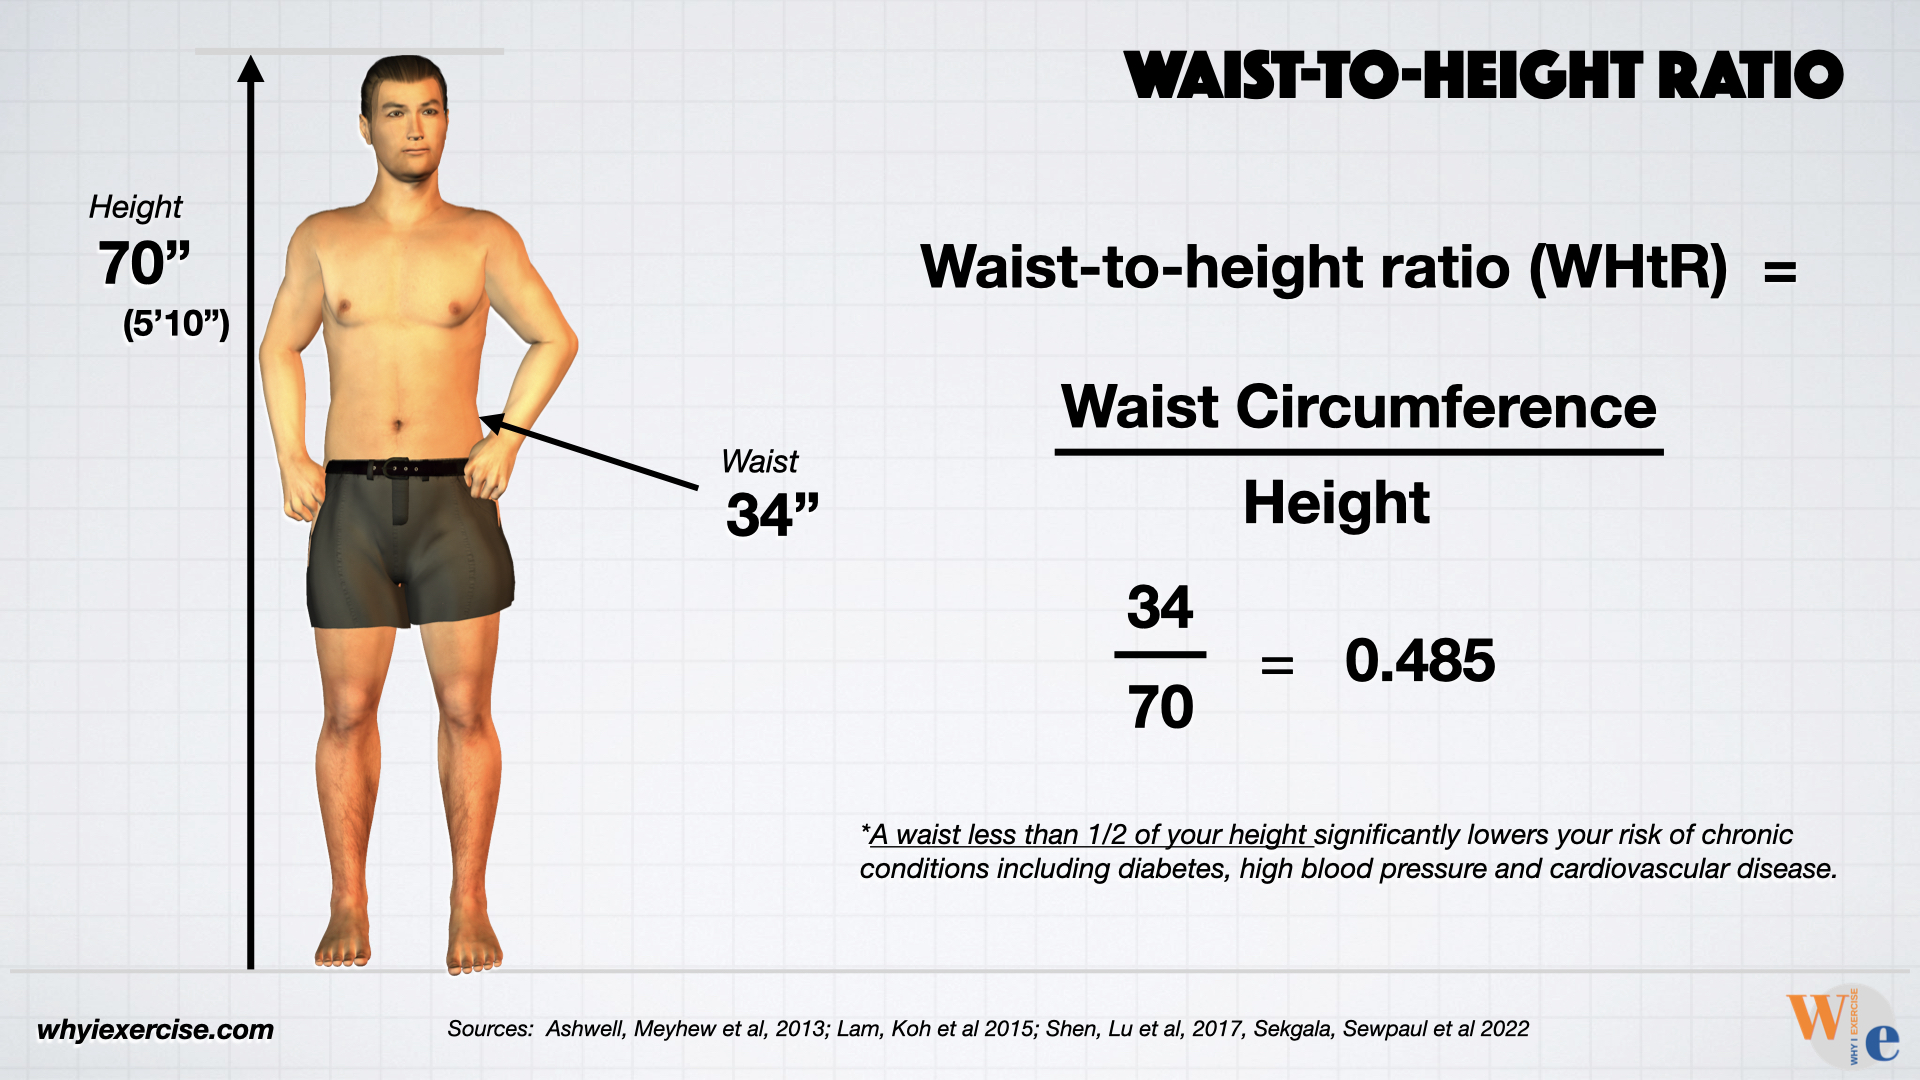 https://www.whyiexercise.com/images/waist.to.height.ratio.standard.jpg